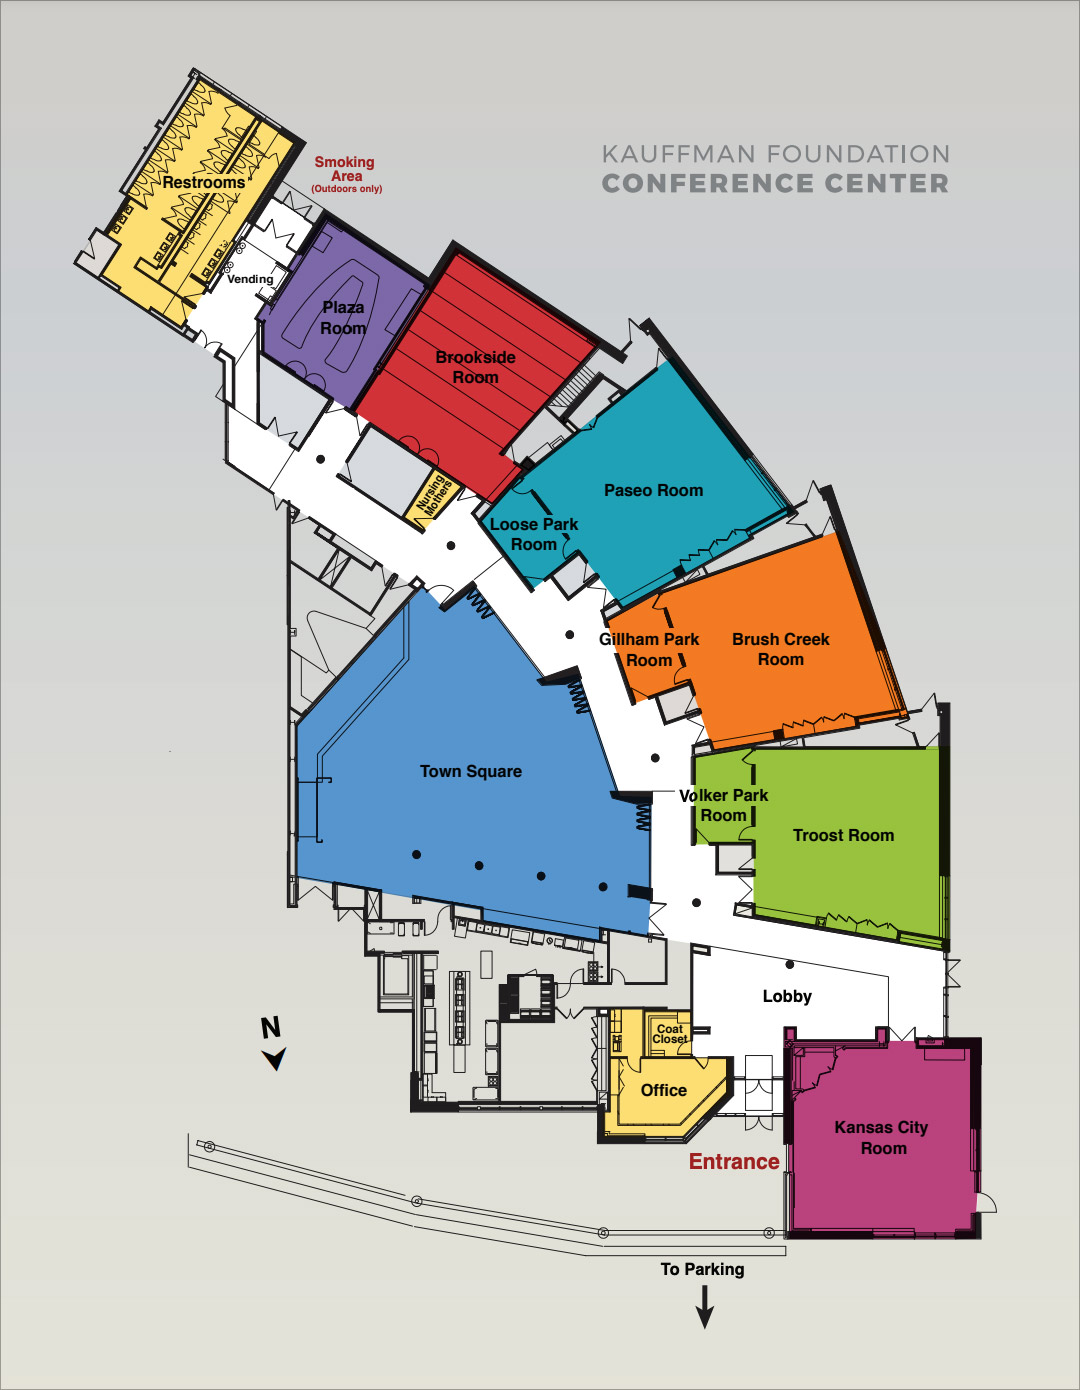 Kauffman Foundation Conference Center building map